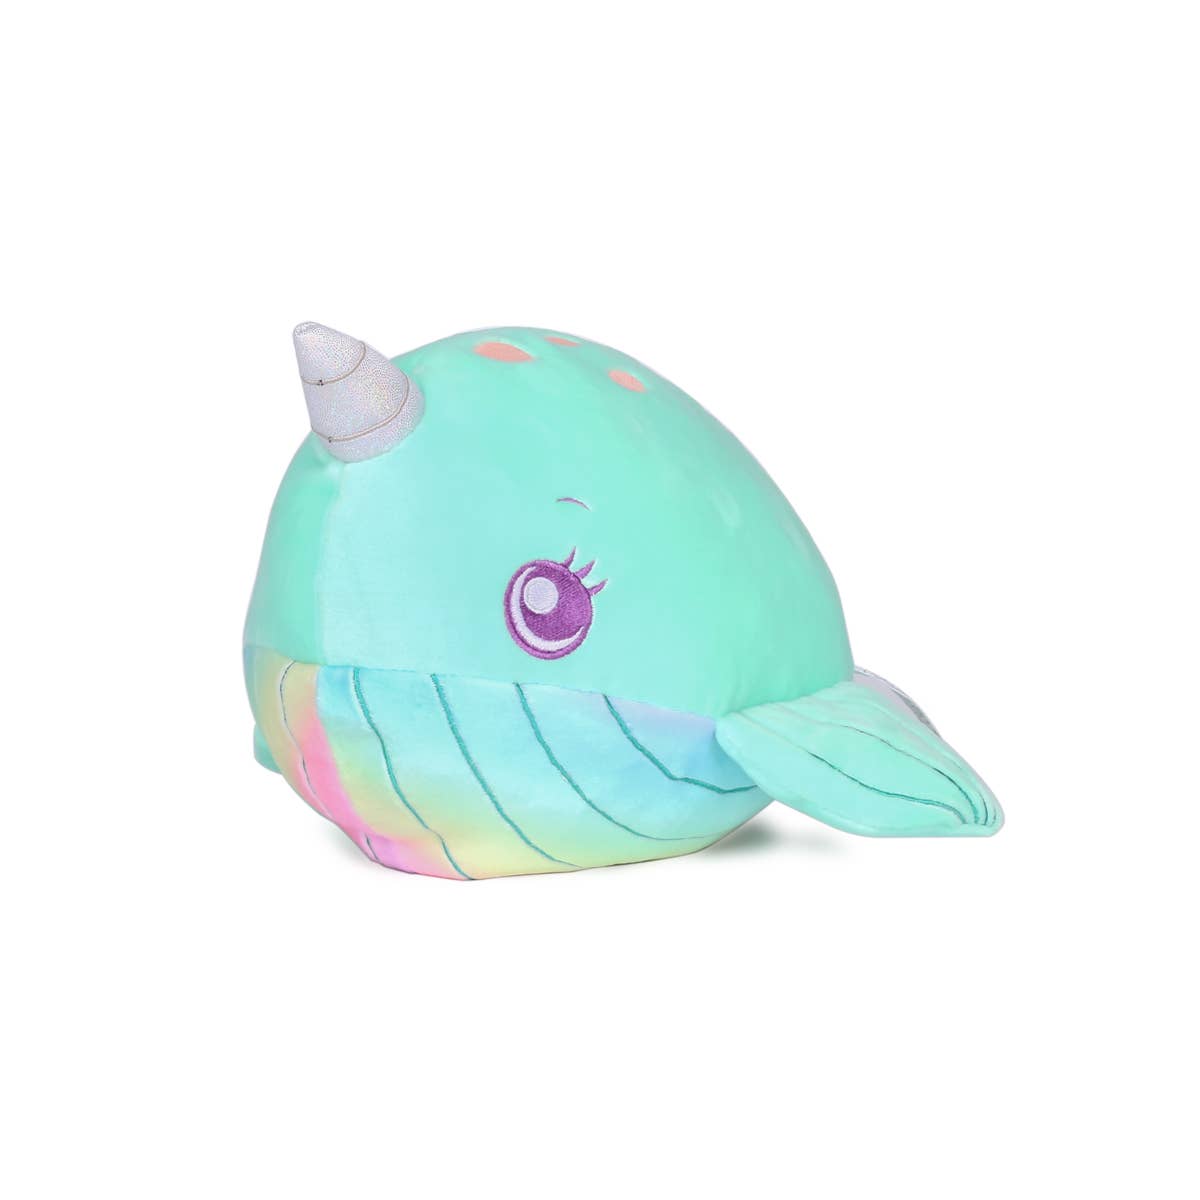 Nickie the Narwhal Glow in the Dark 7.5" Soft Plush Toy